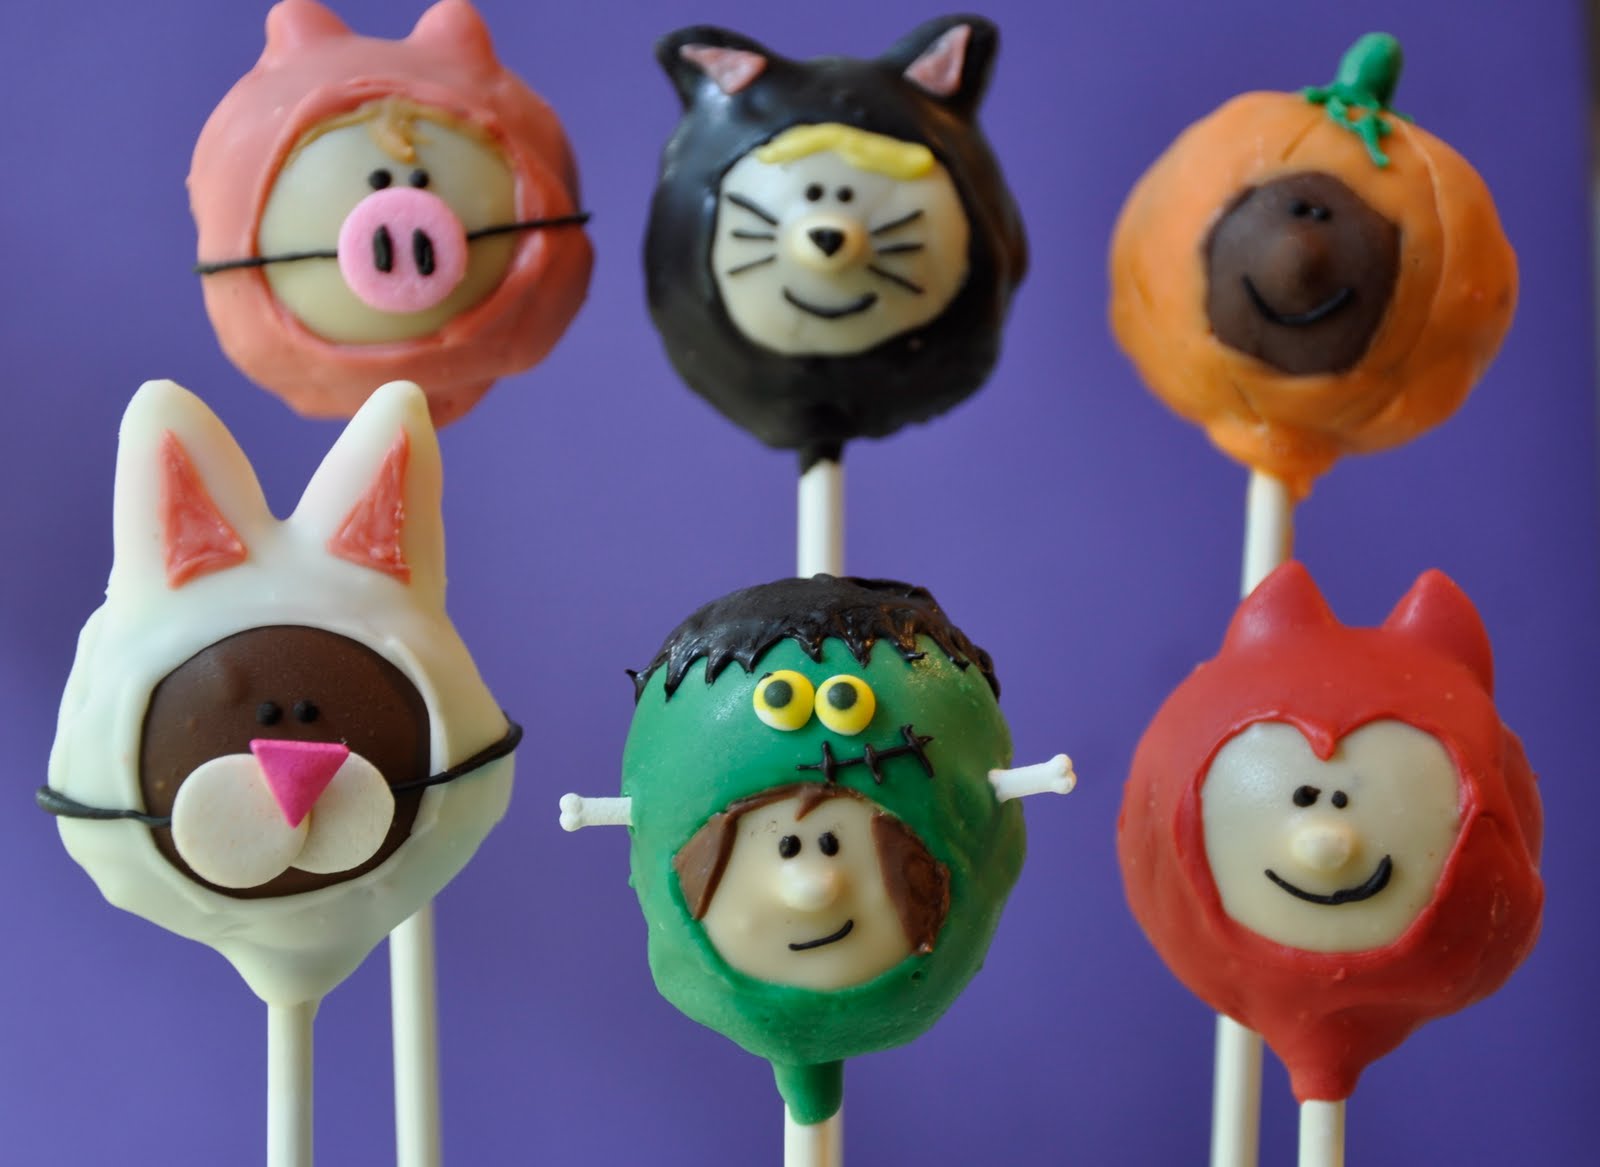 halloween cake pops images  pops kids in their halloween costumes into cake pops hope you enjoy